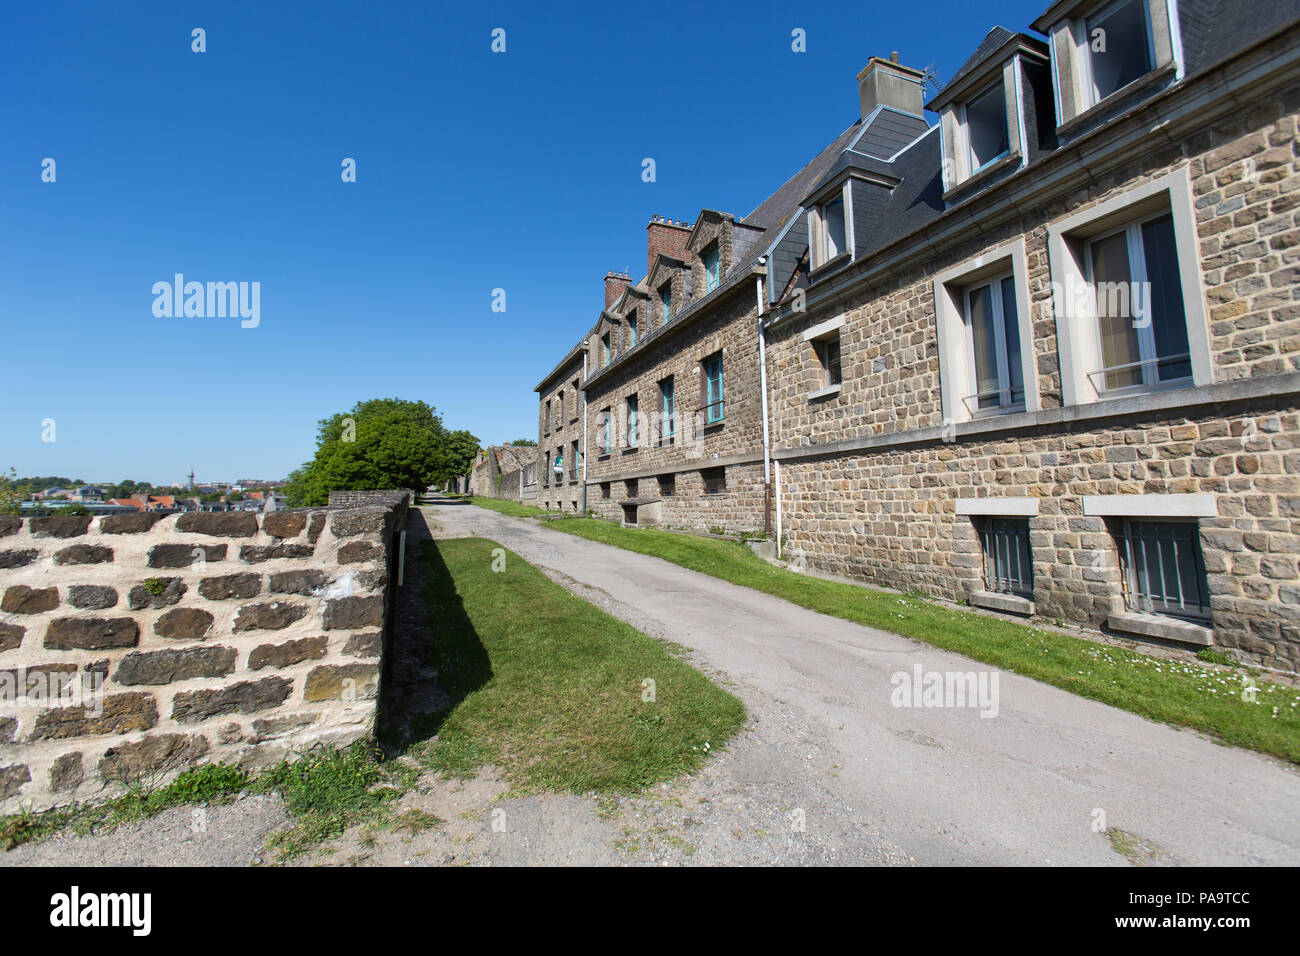 City of Boulogne-sur-Mer, France. Picturesque view of the Haute Ville wall walk. The scene was captured just north of the Porte des Dunes gate. Stock Photo